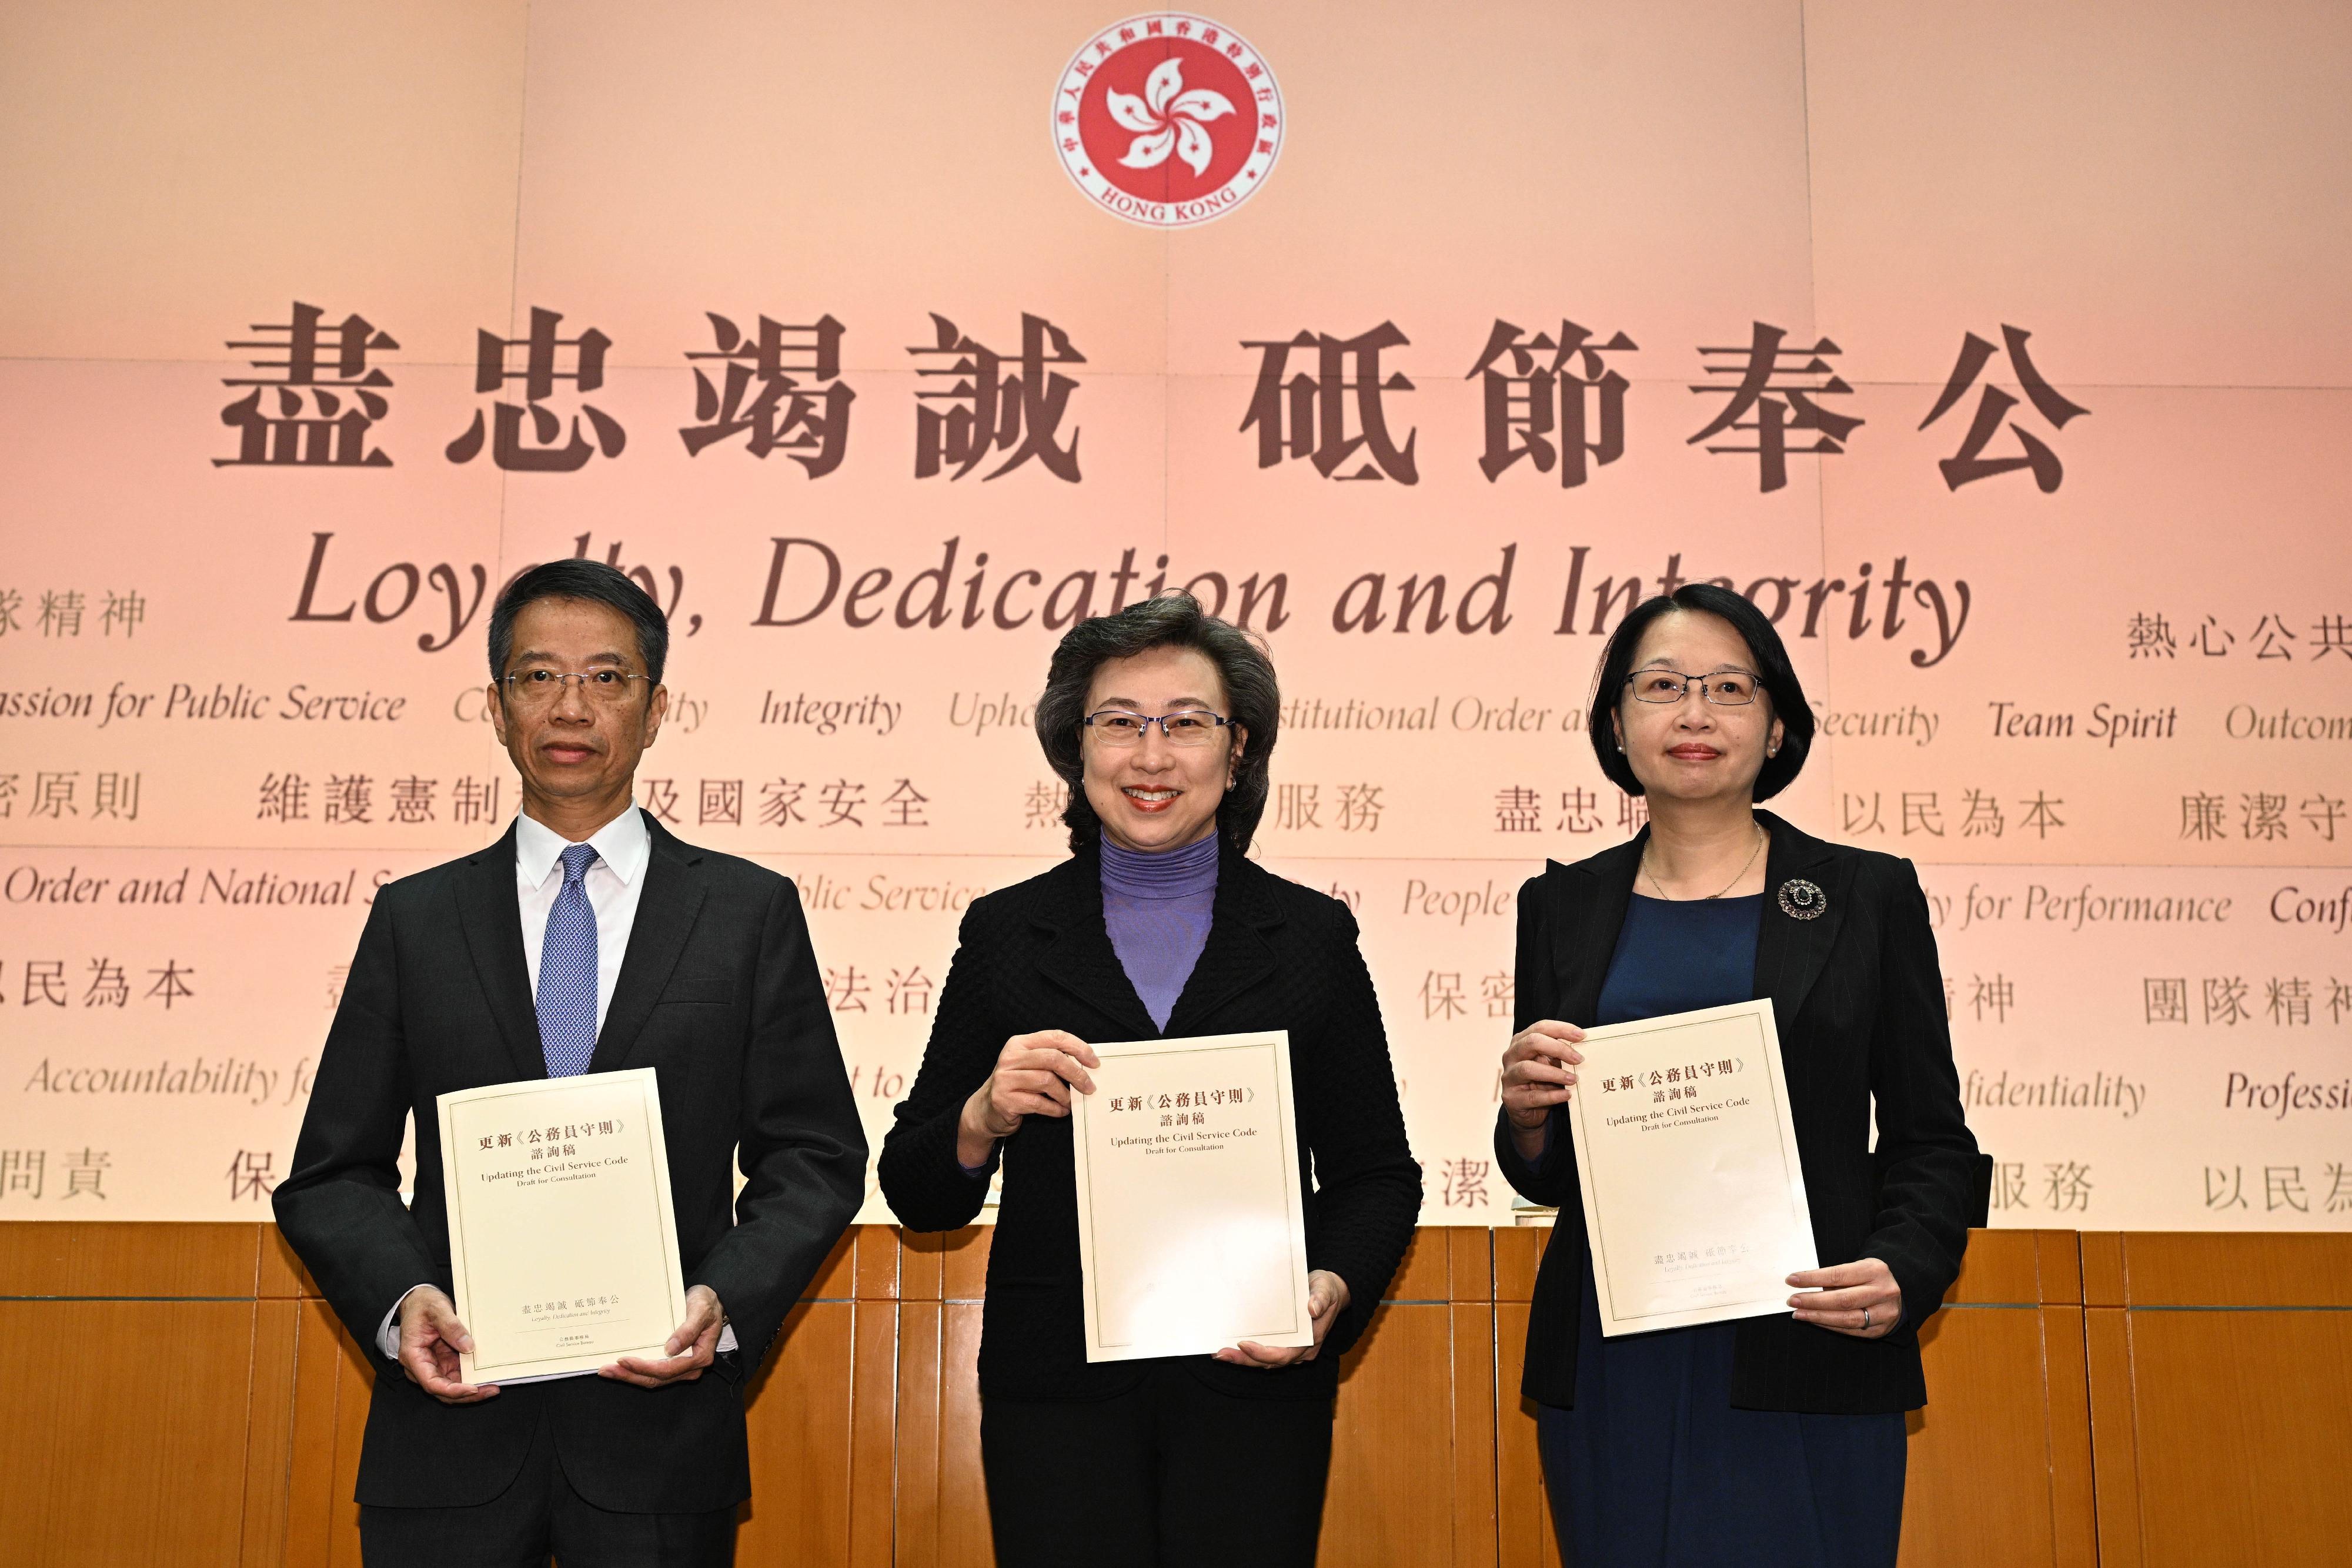 The Secretary for the Civil Service, Mrs Ingrid Yeung, held a press conference today (December 13) on the updated Civil Service Code for consultation. Photo shows (from left) the Permanent Secretary for the Civil Service, Mr Clement Leung; Mrs Yeung; and Deputy Secretary for the Civil Service Mrs Angelina Cheung showing the updated Civil Service Code (Draft for Consultation).